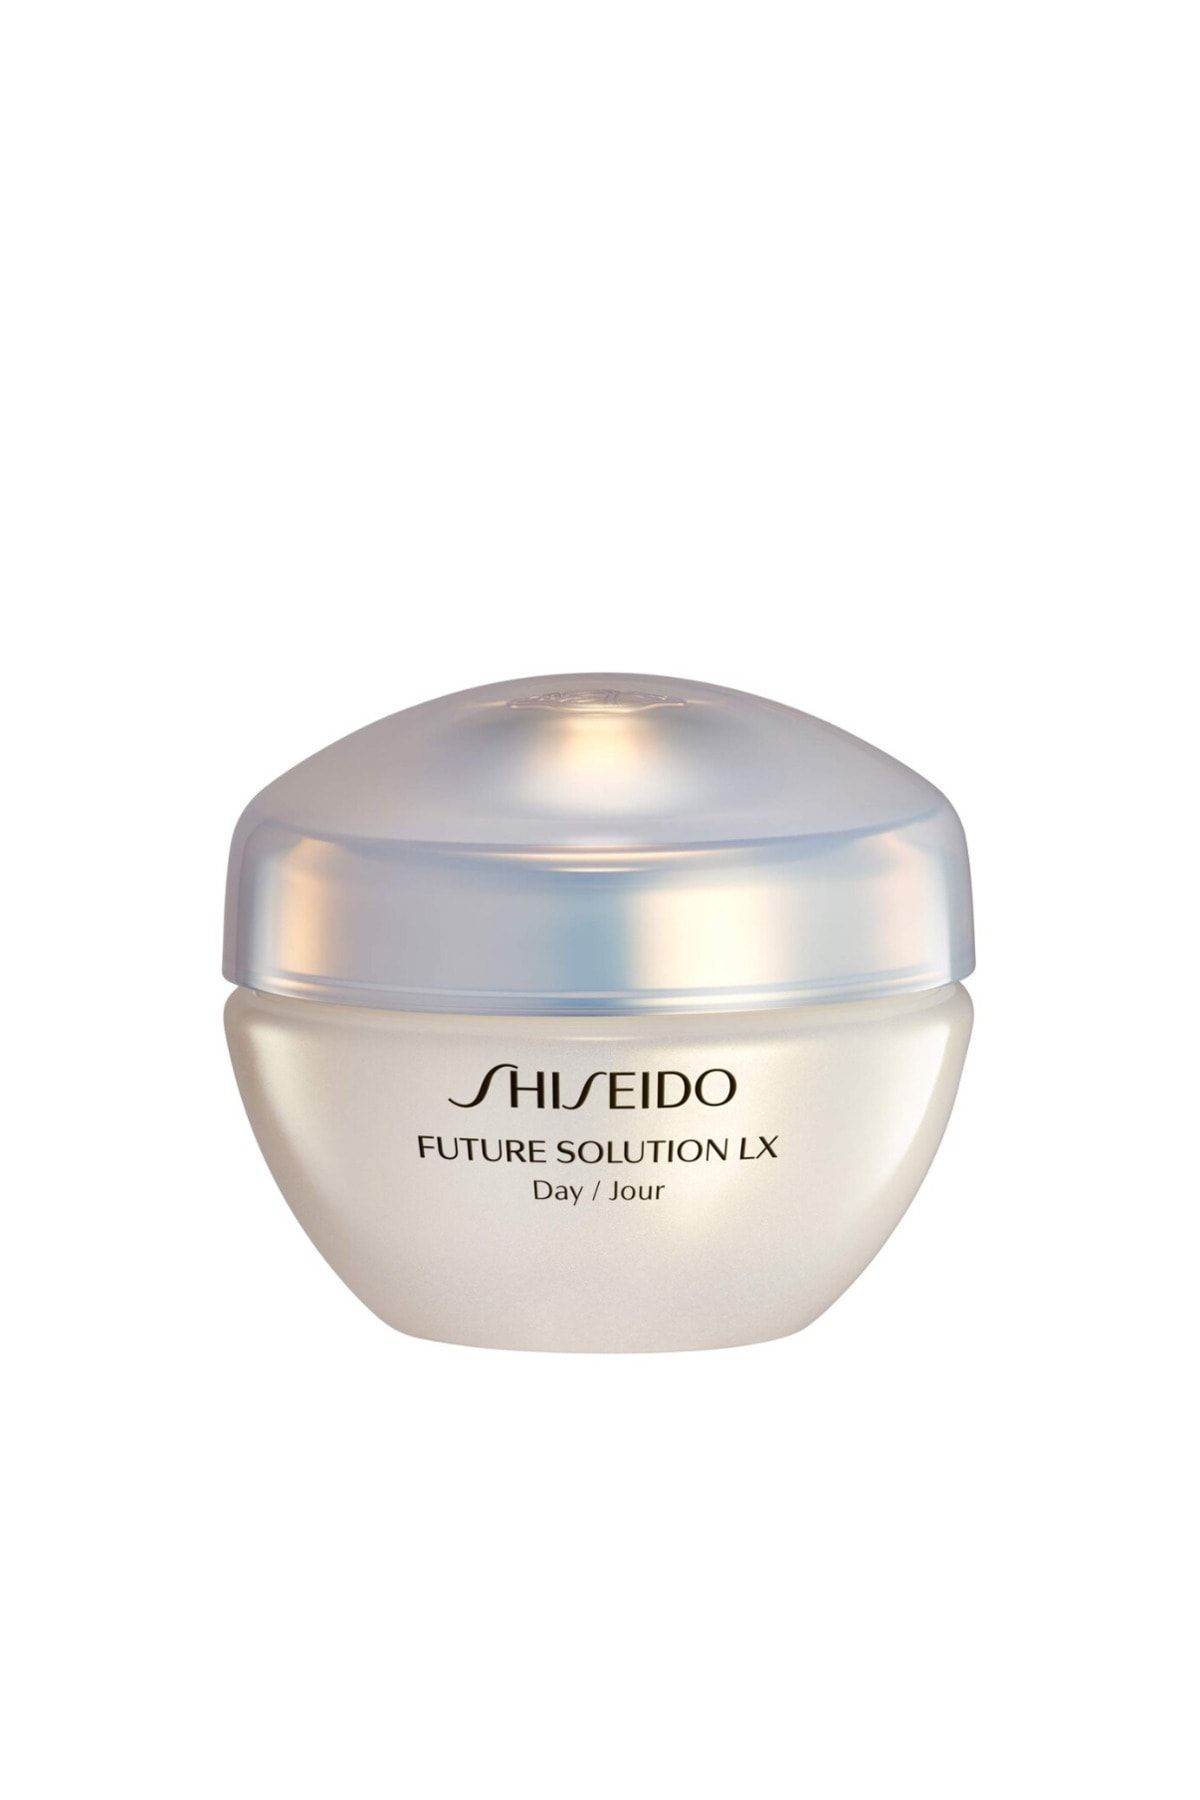 Shiseido Future Solution LX Total Protective Moisturizer with Broad Spectrum SPF 20 50 ml